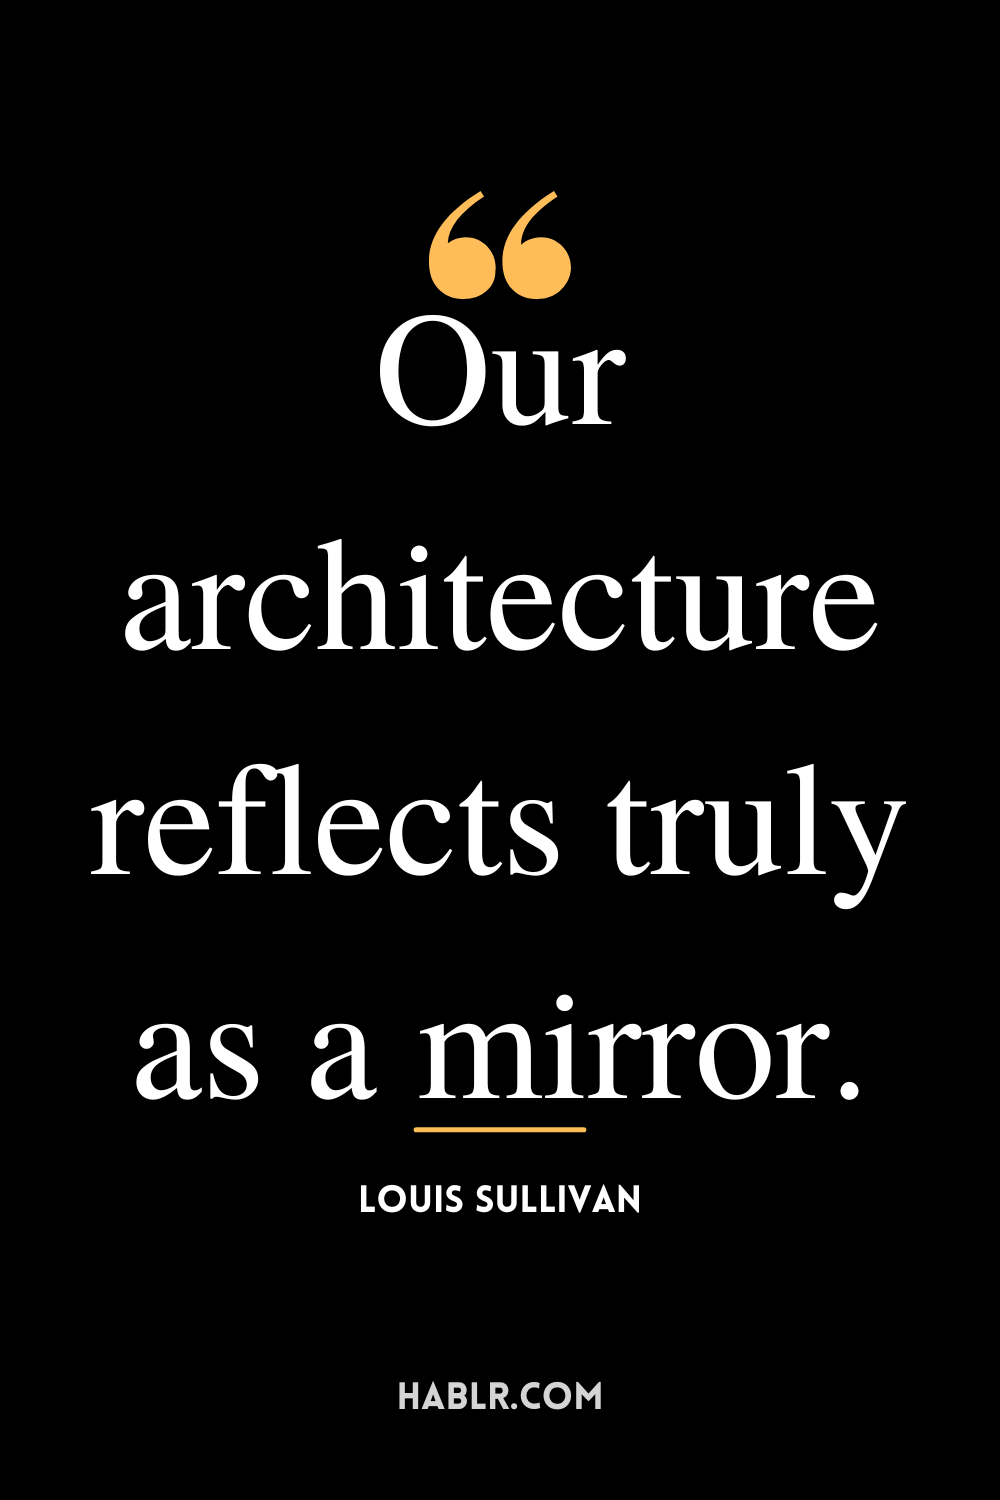 “Our architecture reflects truly as a mirror.” -Louis Sullivan